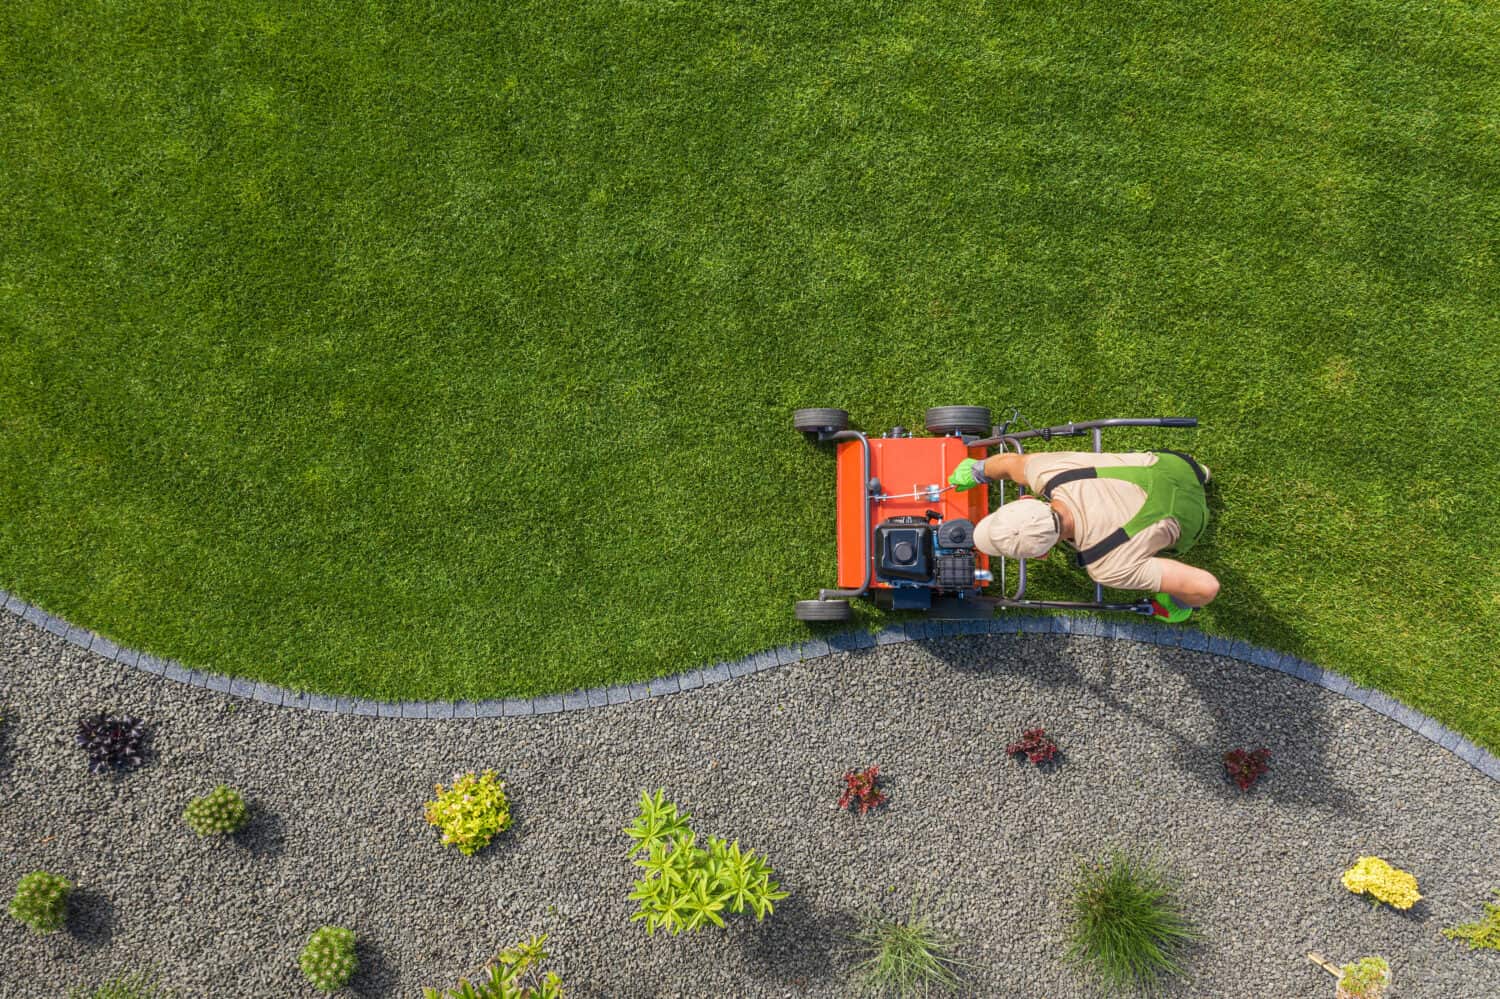 Powerful Gasoline Lawn Aerator Job For Controlling Lawn Thatch, And Reducing Soil Compaction. Backyard Grass Field Maintenance. Caucasian Gardener in His 40s. Aerial View.